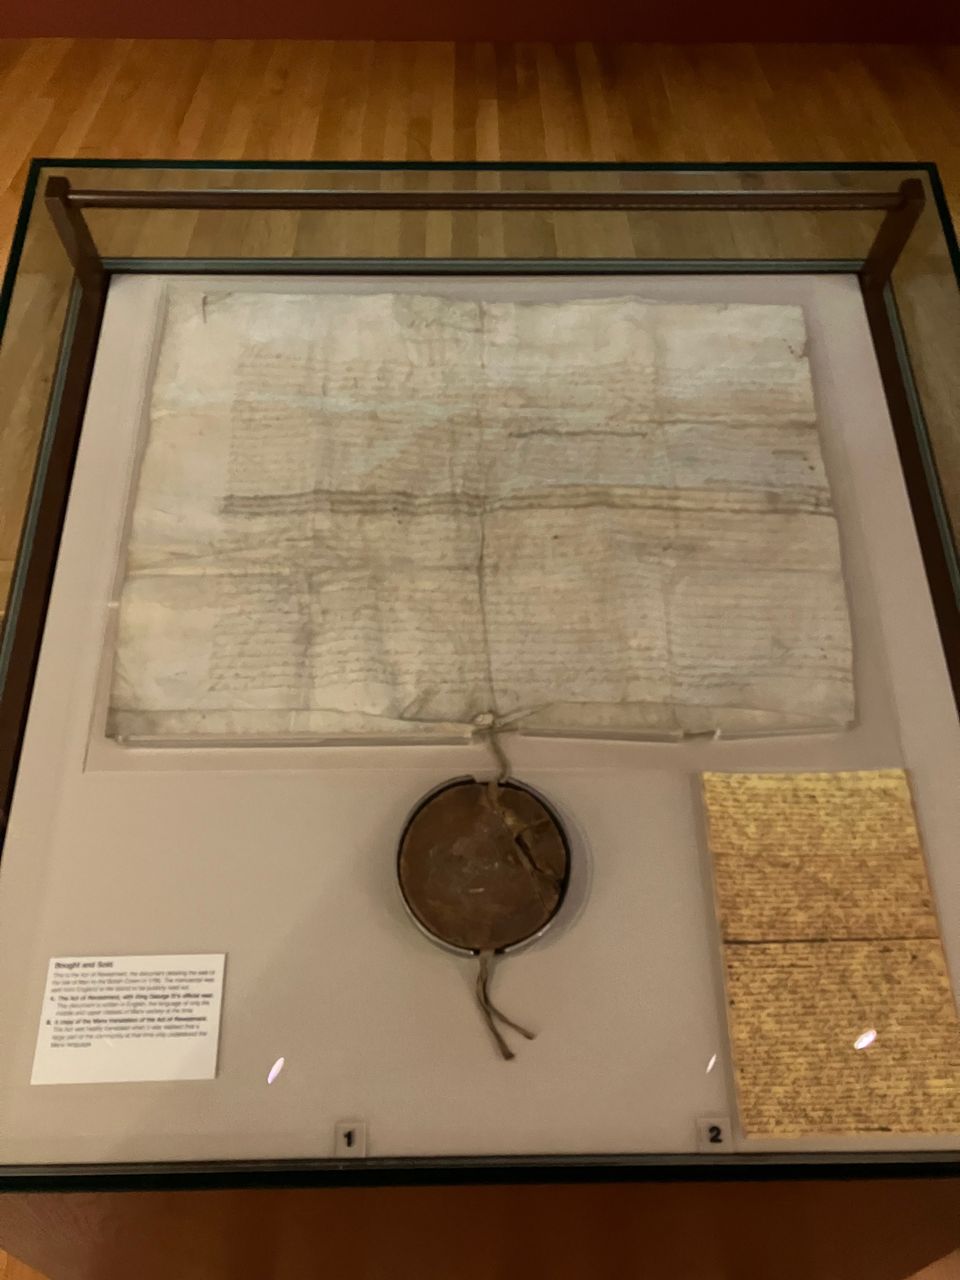 Exhibit from the Manx museum of the original sheet of Act of Isle of Man Purchase Act 1765. It's written in longhand in  